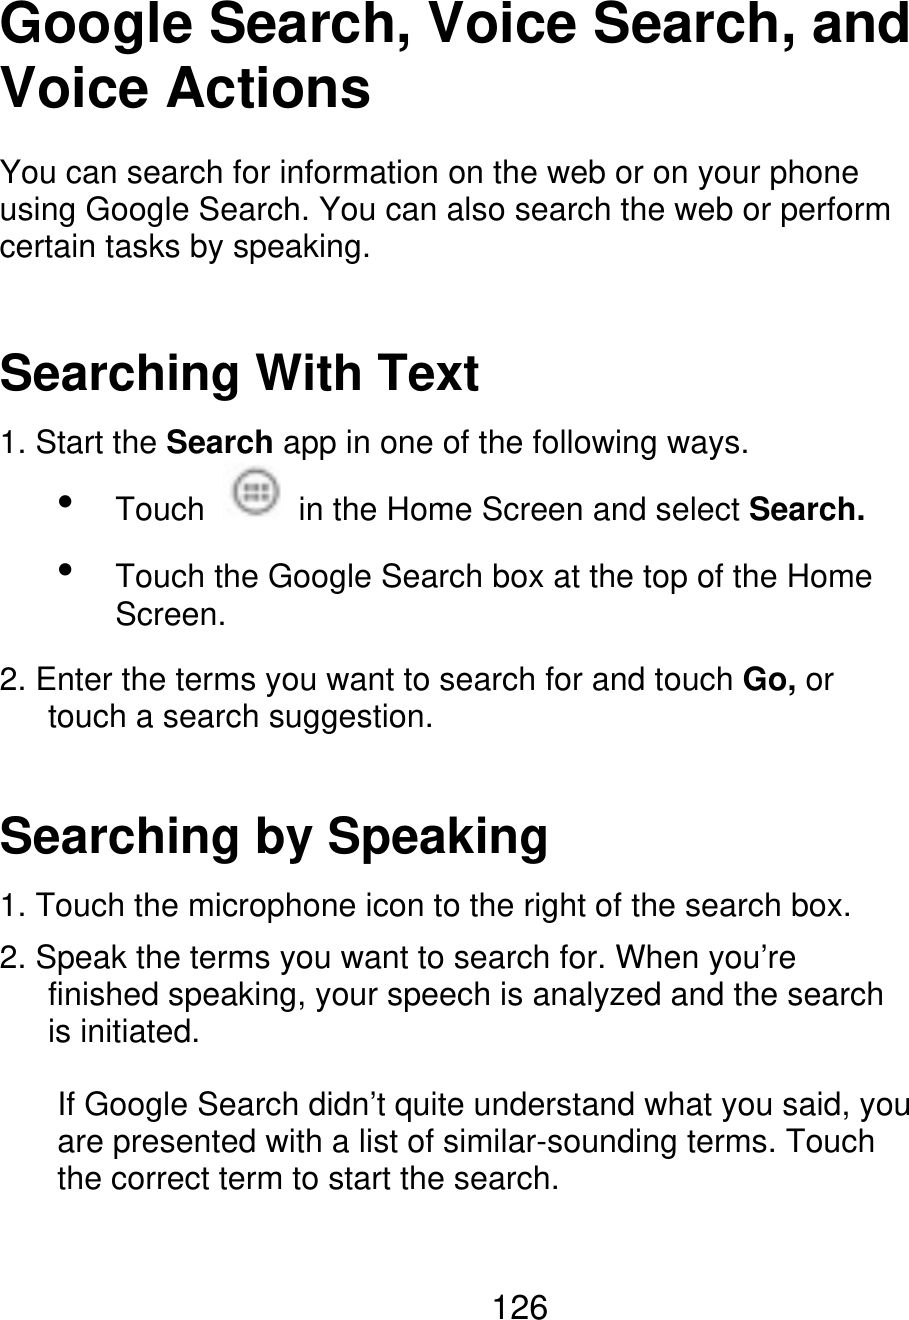 Google Search, Voice Search, and Voice Actions You can search for information on the web or on your phone using Google Search. You can also search the web or perform certain tasks by speaking. Searching With Text 1. Start the Search app in one of the following ways.   Touch in the Home Screen and select Search. Touch the Google Search box at the top of the Home Screen. 2. Enter the terms you want to search for and touch Go, or    touch a search suggestion. Searching by Speaking 1. Touch the microphone icon to the right of the search box. 2. Speak the terms you want to search for. When you’re       finished speaking, your speech is analyzed and the search    is initiated. If Google Search didn’t quite understand what you said, you are presented with a list of similar-sounding terms. Touch the correct term to start the search. 126 